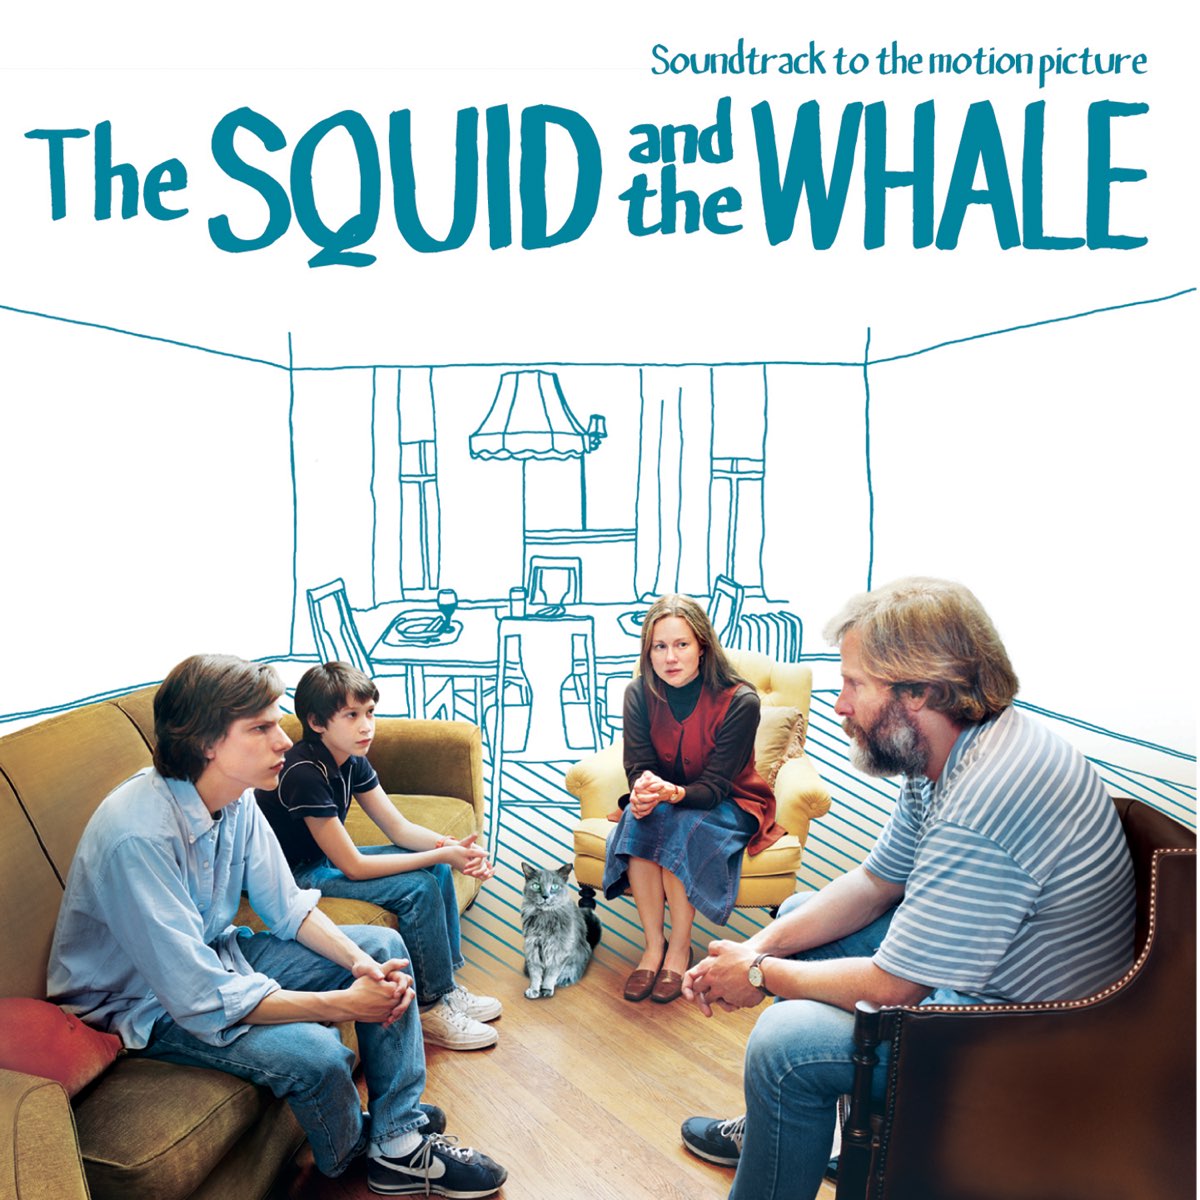 The Squid and the Whale (Soundtrack to the Motion Picture) - Album by  Various Artists - Apple Music